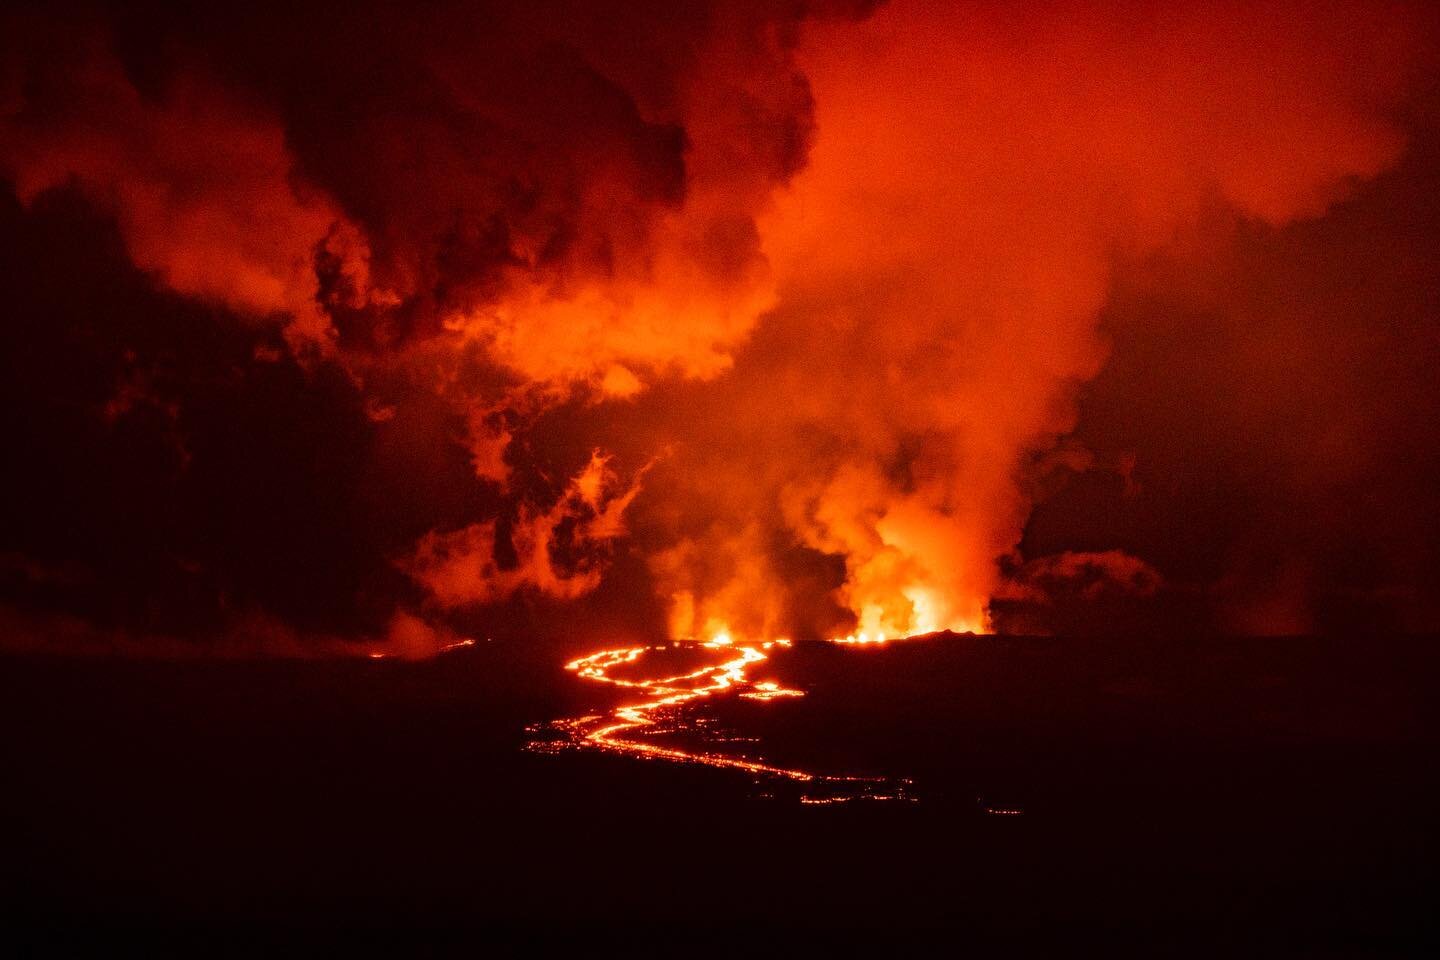 Mauna Loa from Saddle Road last night. Still miles away, but the smell was like it was right there. It&rsquo;s hard to comprehend the amount of lava and gasses already released when this was taken less than 24 hours since the start of the eruption. L